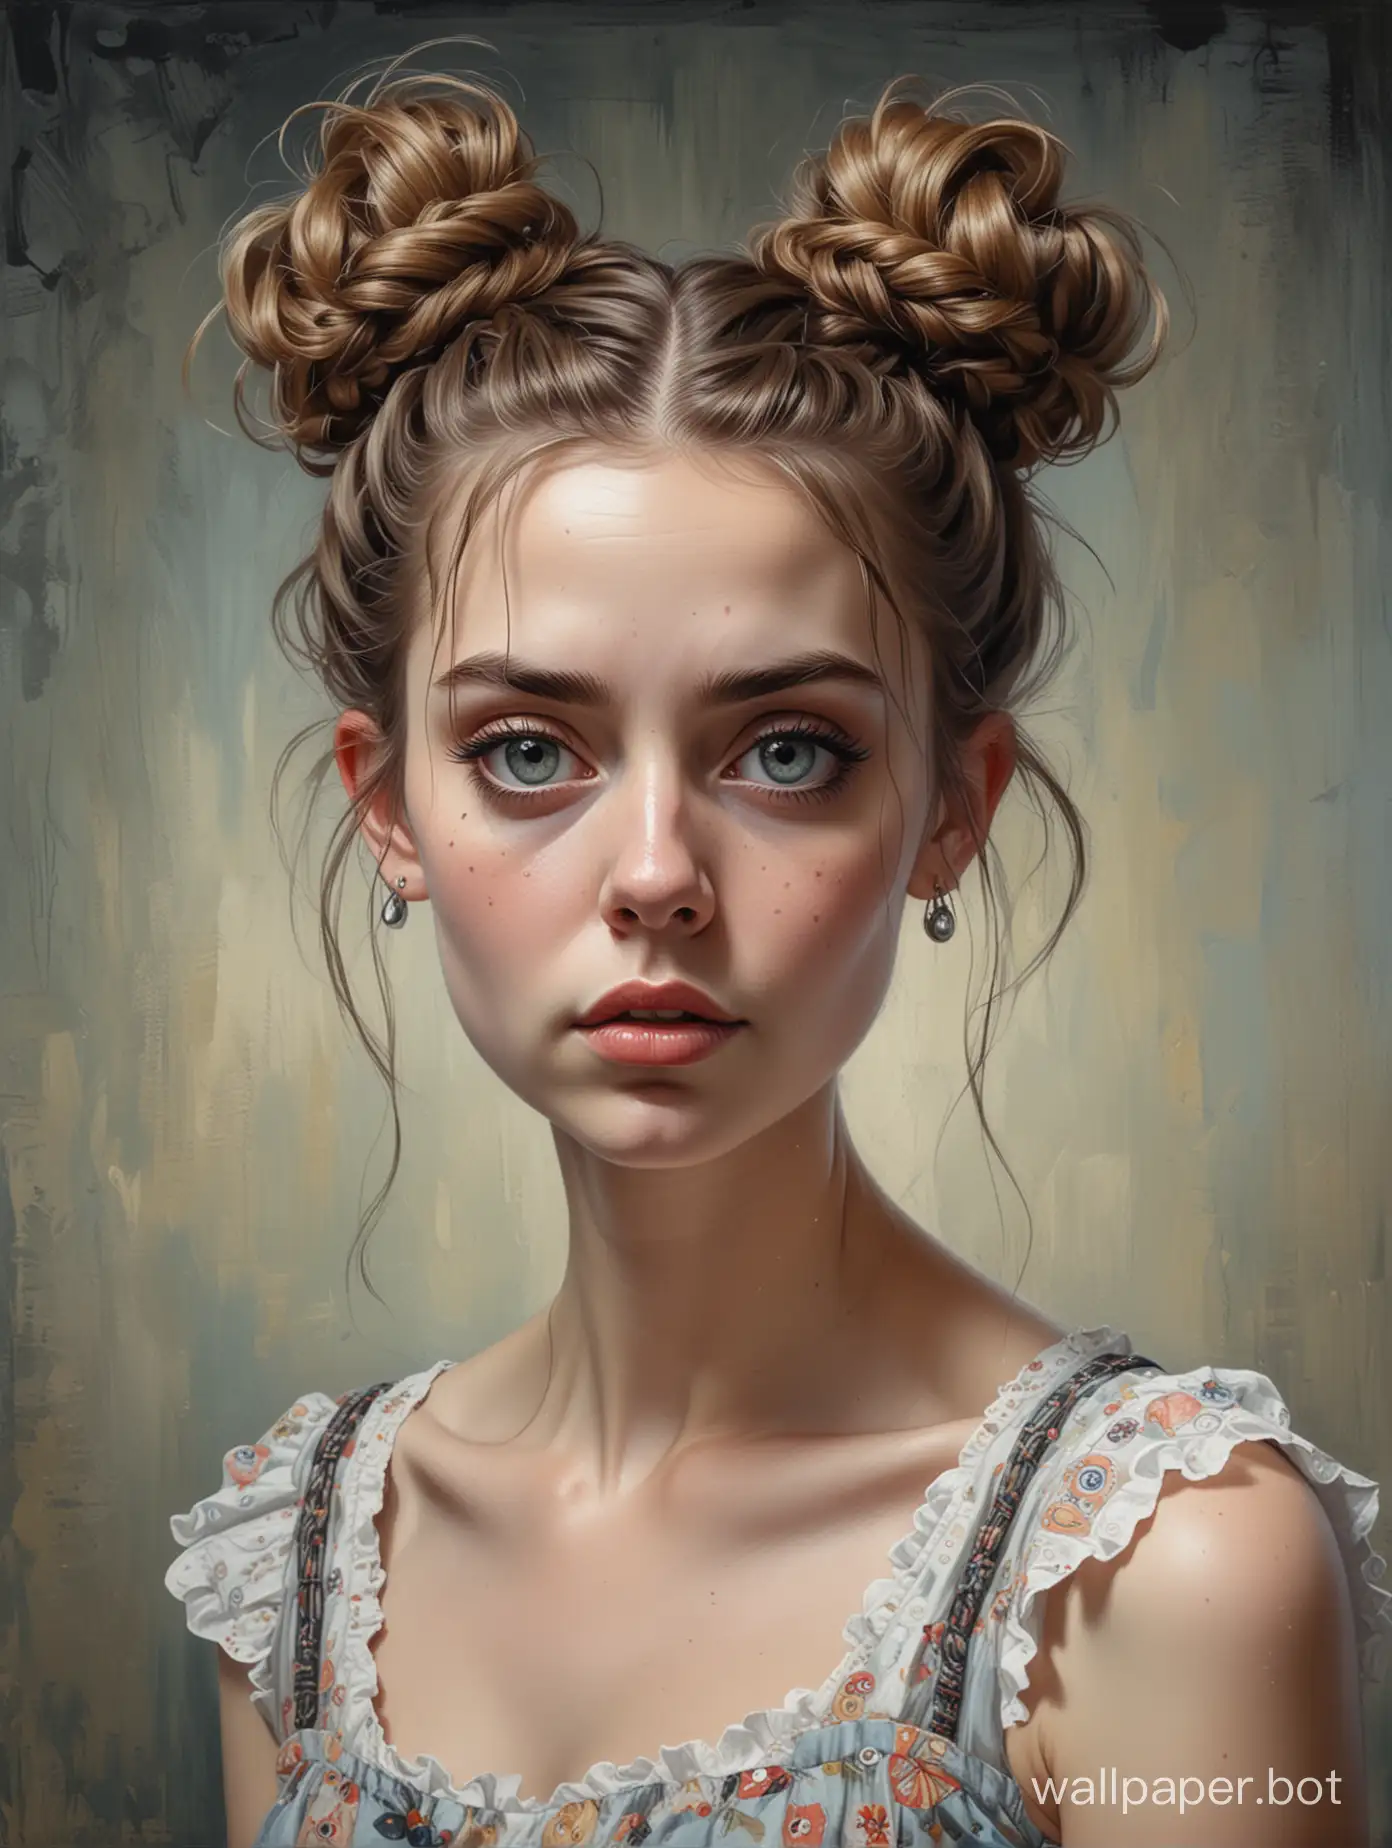 oil painting in the style of comics by Tim Burton, (eccentric girl, expressive eyes, hair beautifully braided in a fancy bun, wearing a sundress, intricate details), with an Impasto texture, eccentric, surreal, super detailed, super clear and sharp, glossy.